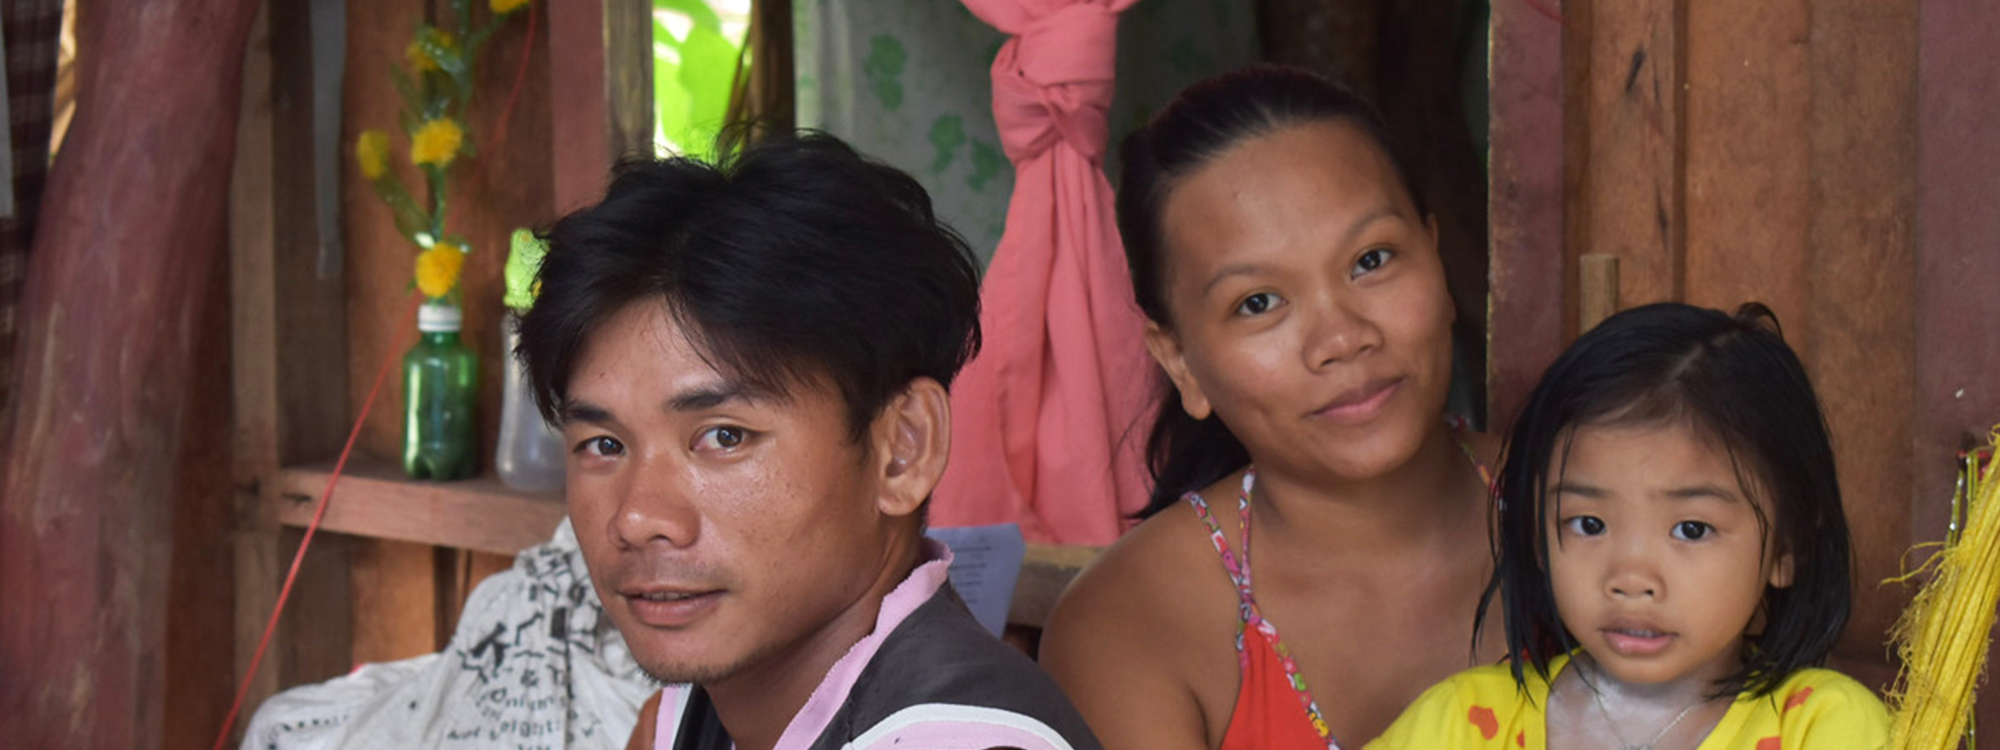 A family of three in the Philippines